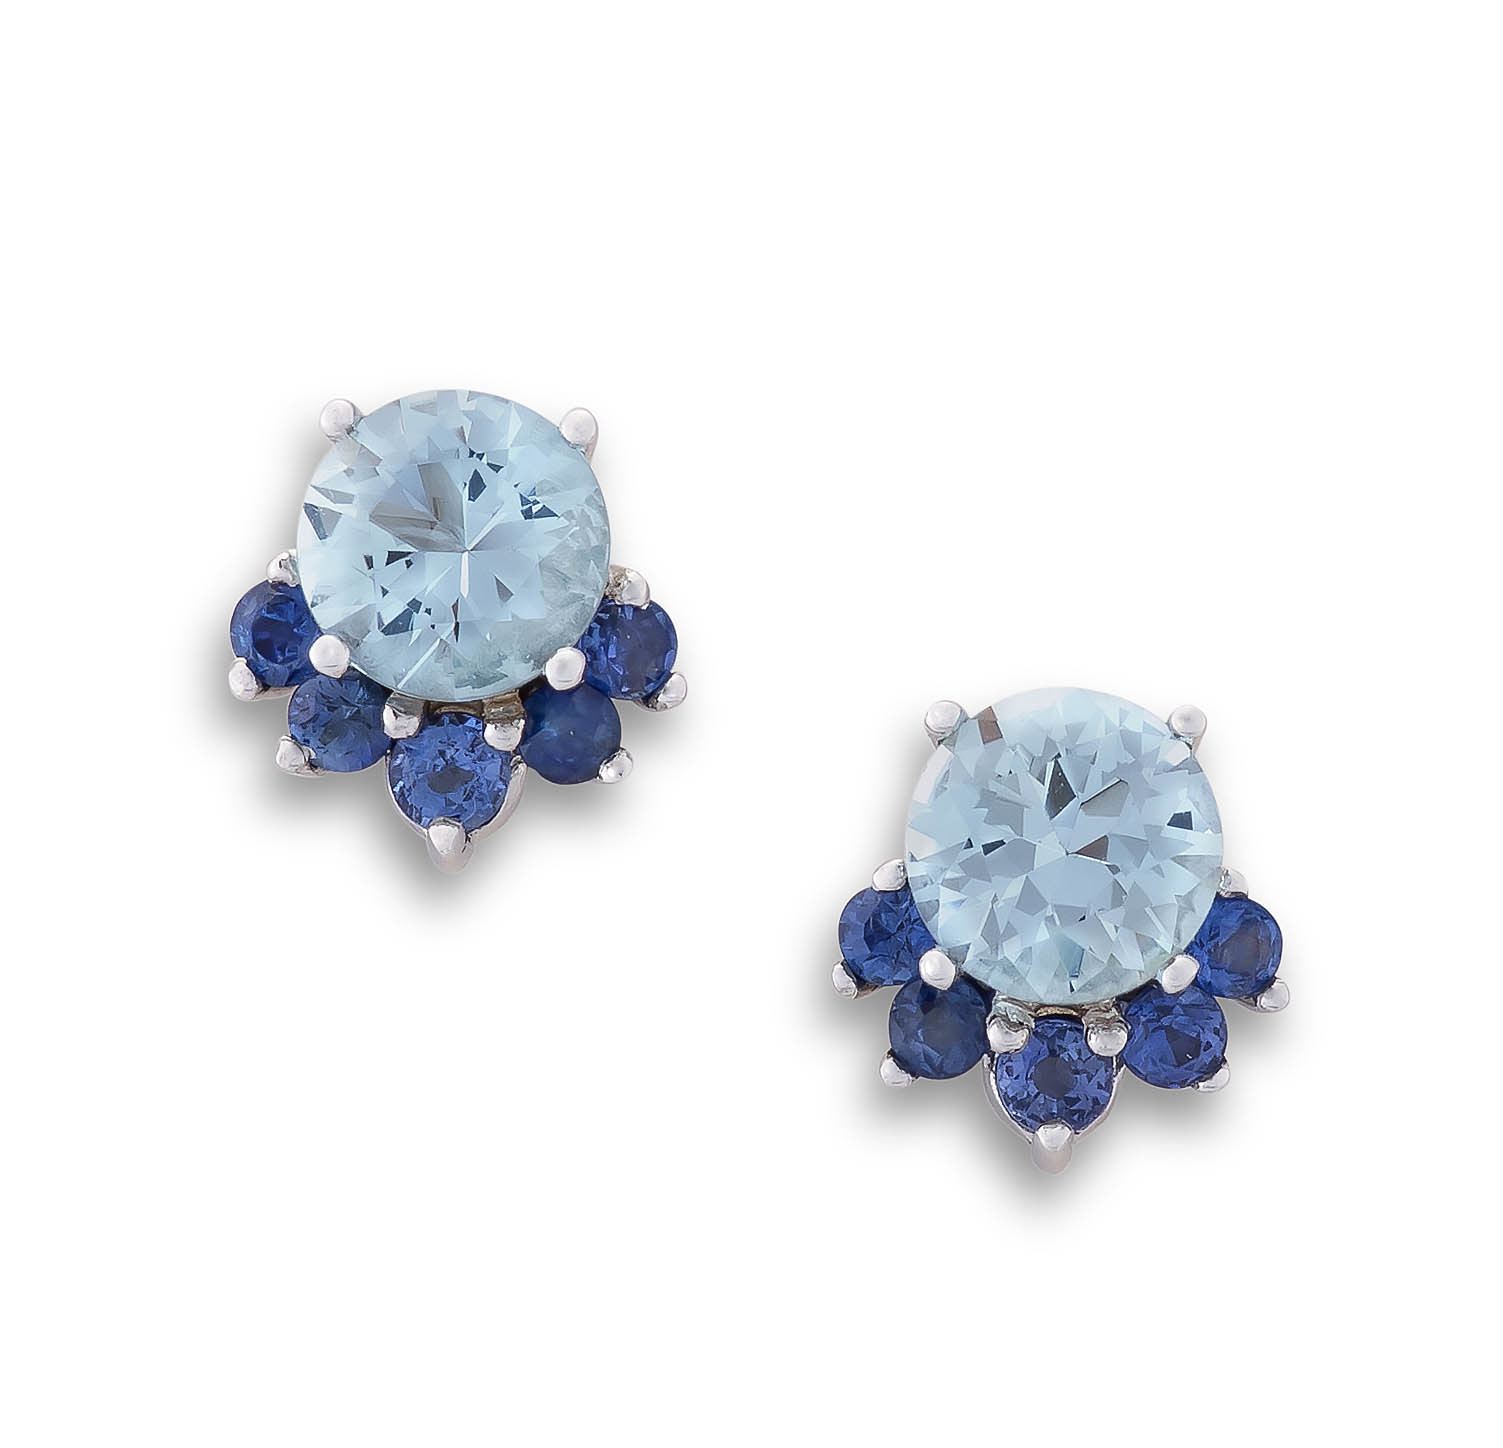 Pair of aquamarine and sapphire 14ct white gold earrings, designed by Taz Watson